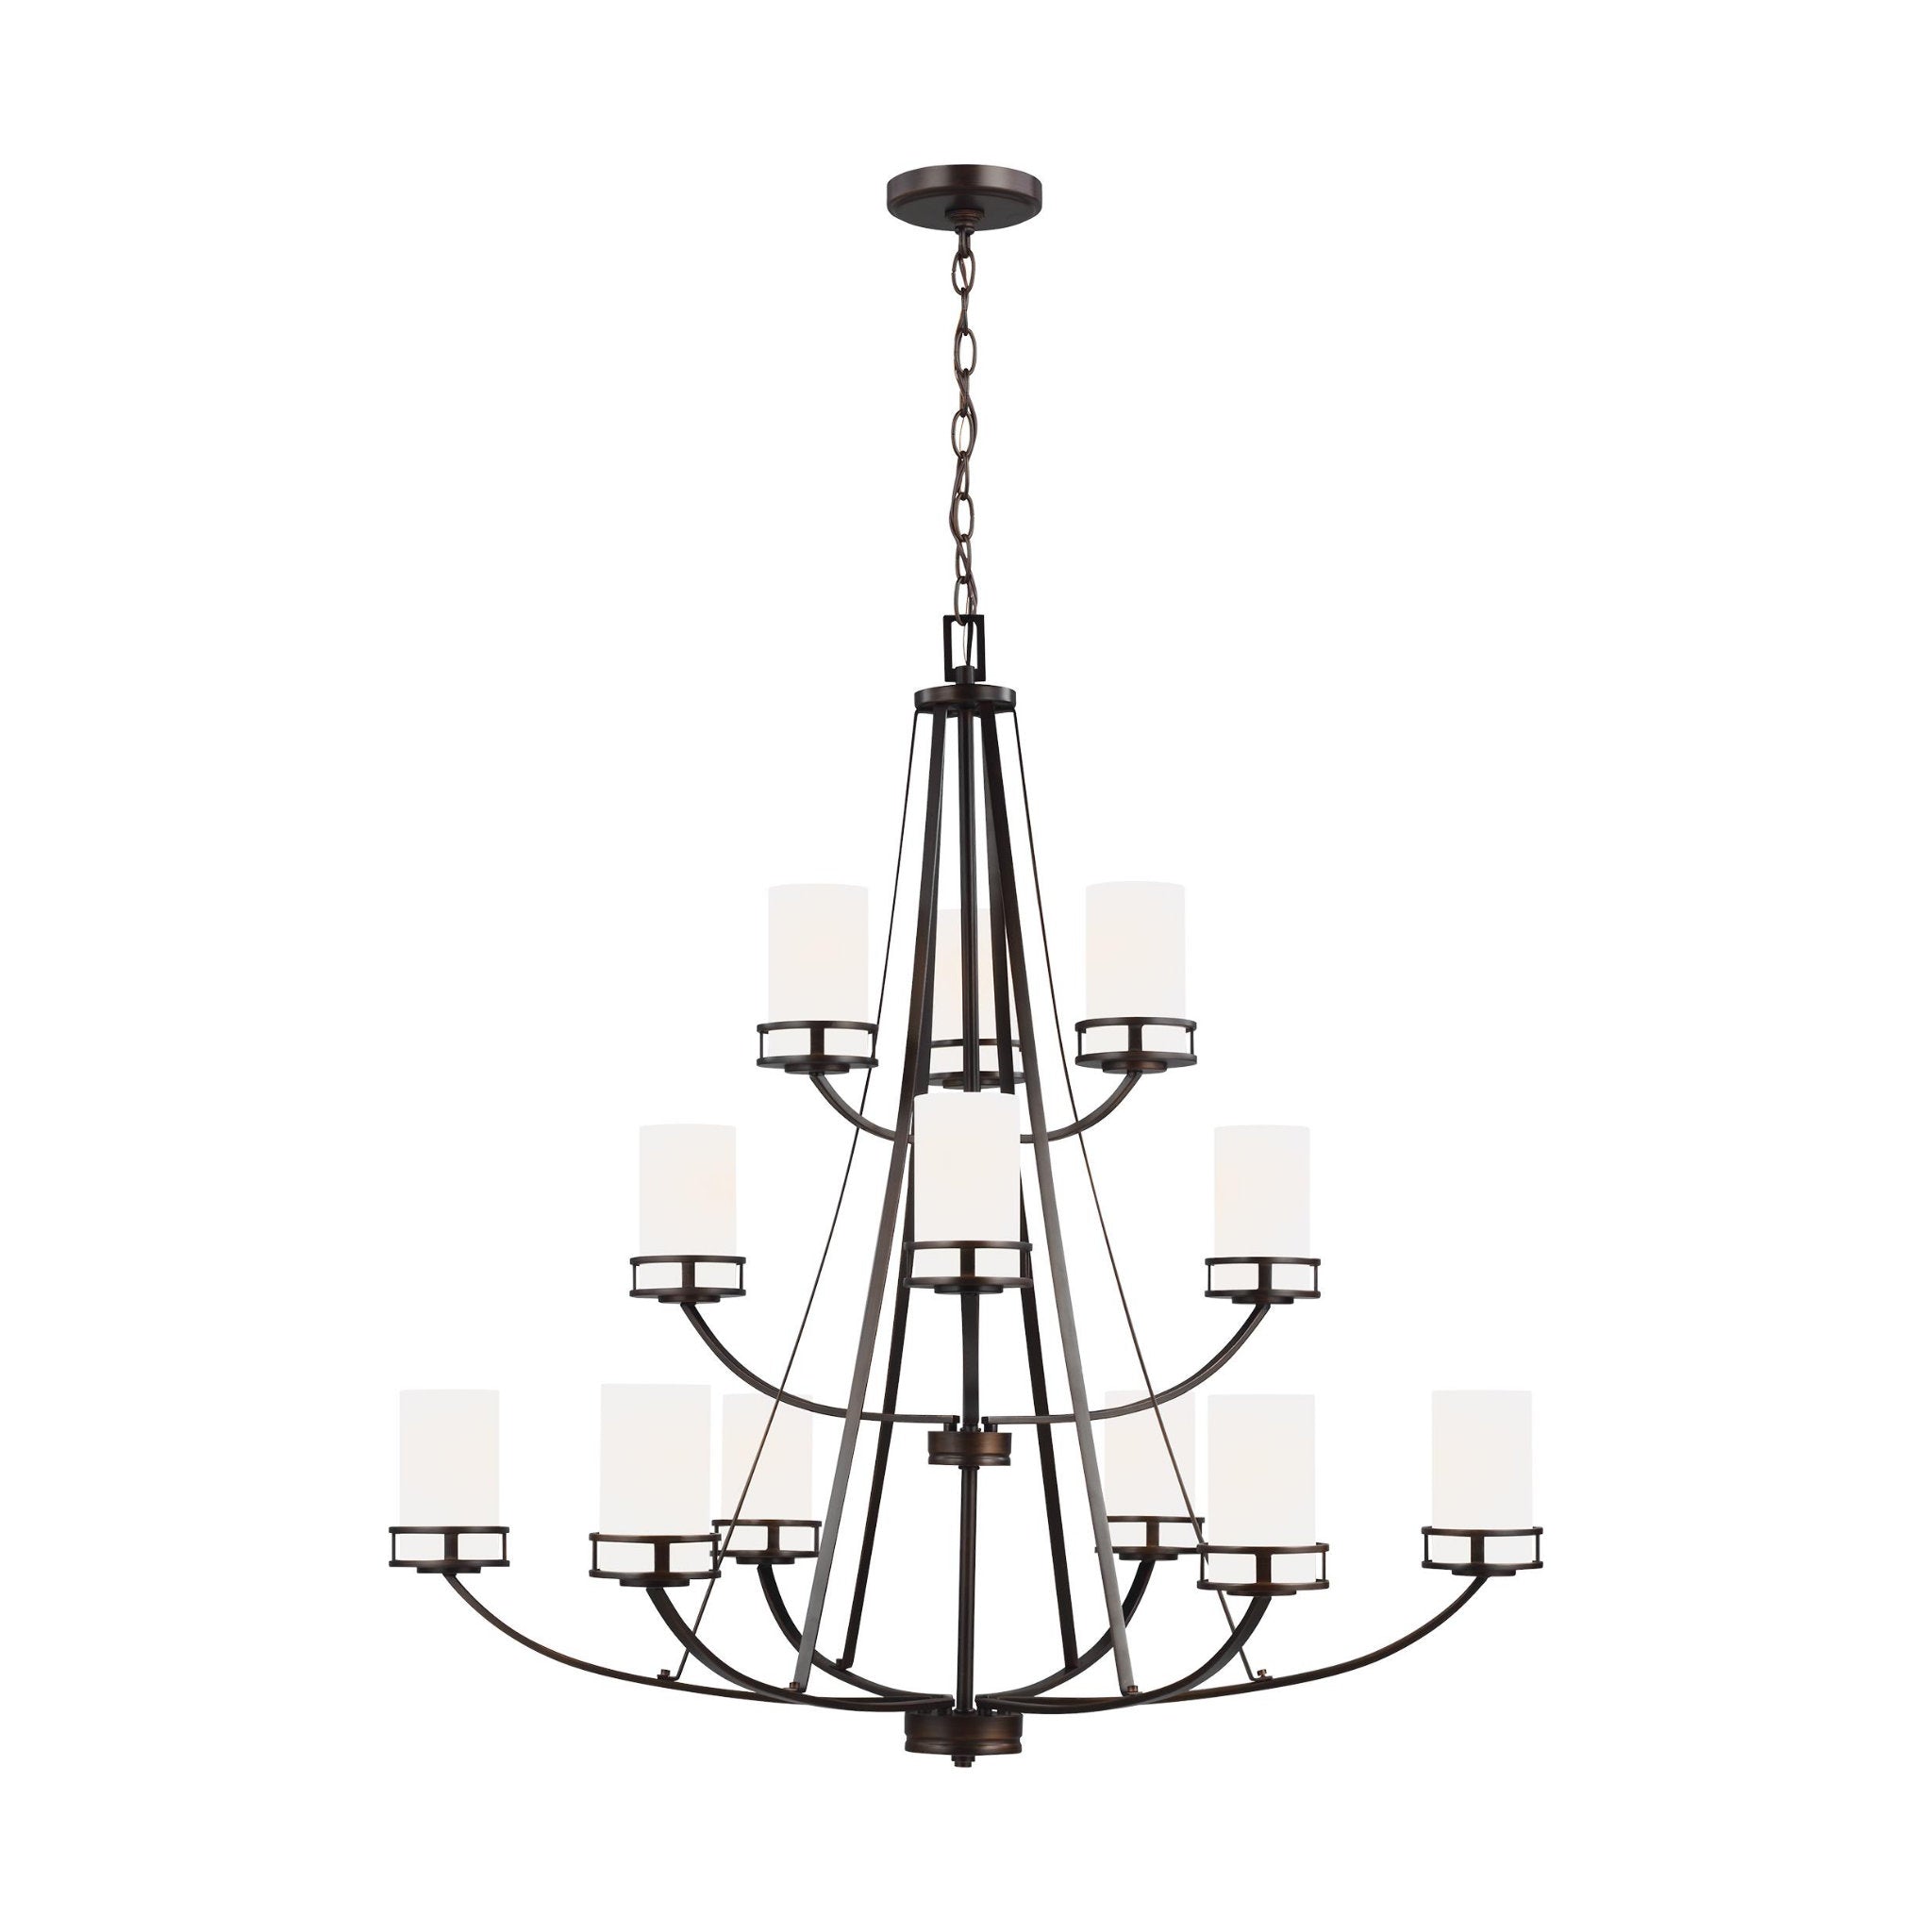 Robie Twelve Light Chandelier Transitional 40.625" Height Steel Round Etched / White Inside Shade in Bronze